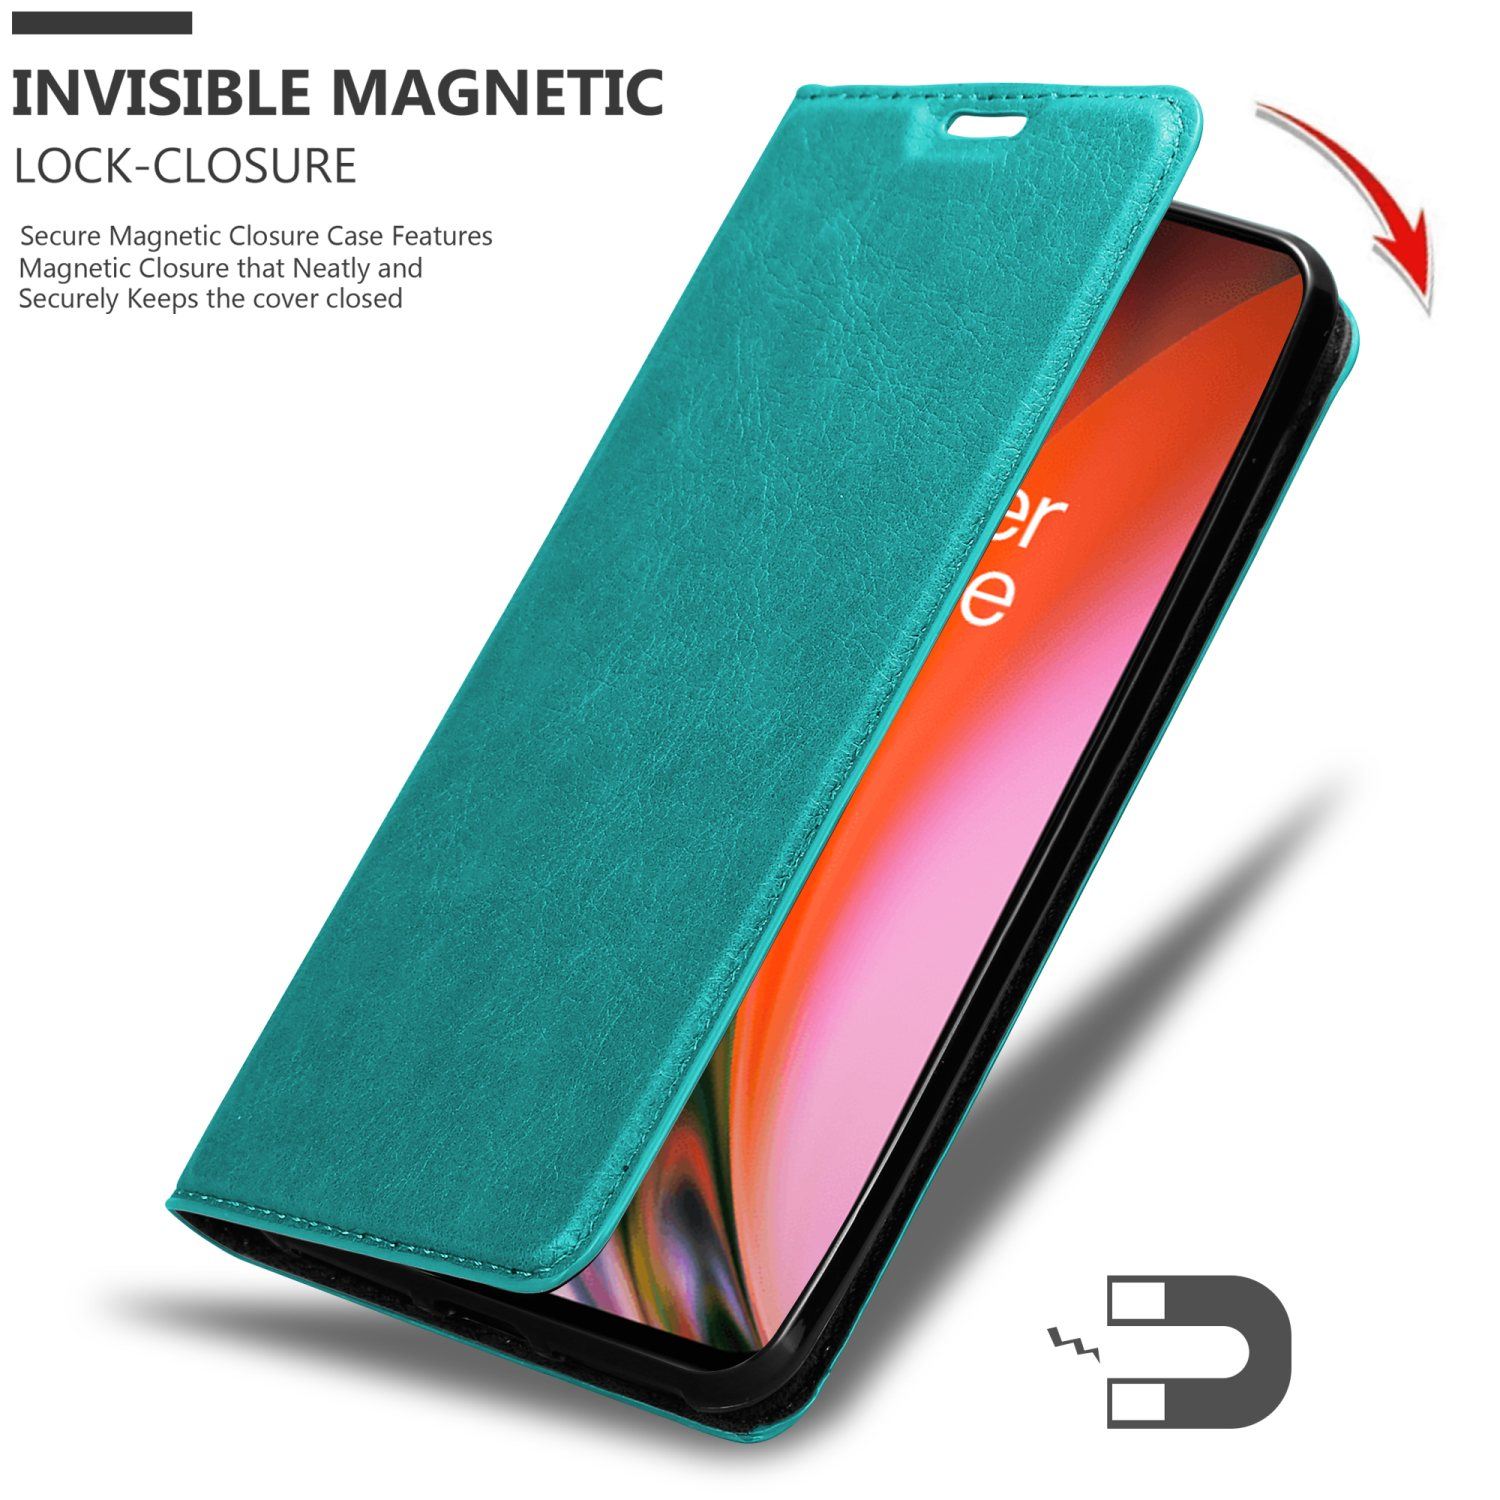 Invisible 2 5G, PETROL Book OnePlus, Magnet, Nord CADORABO TÜRKIS Hülle Bookcover,